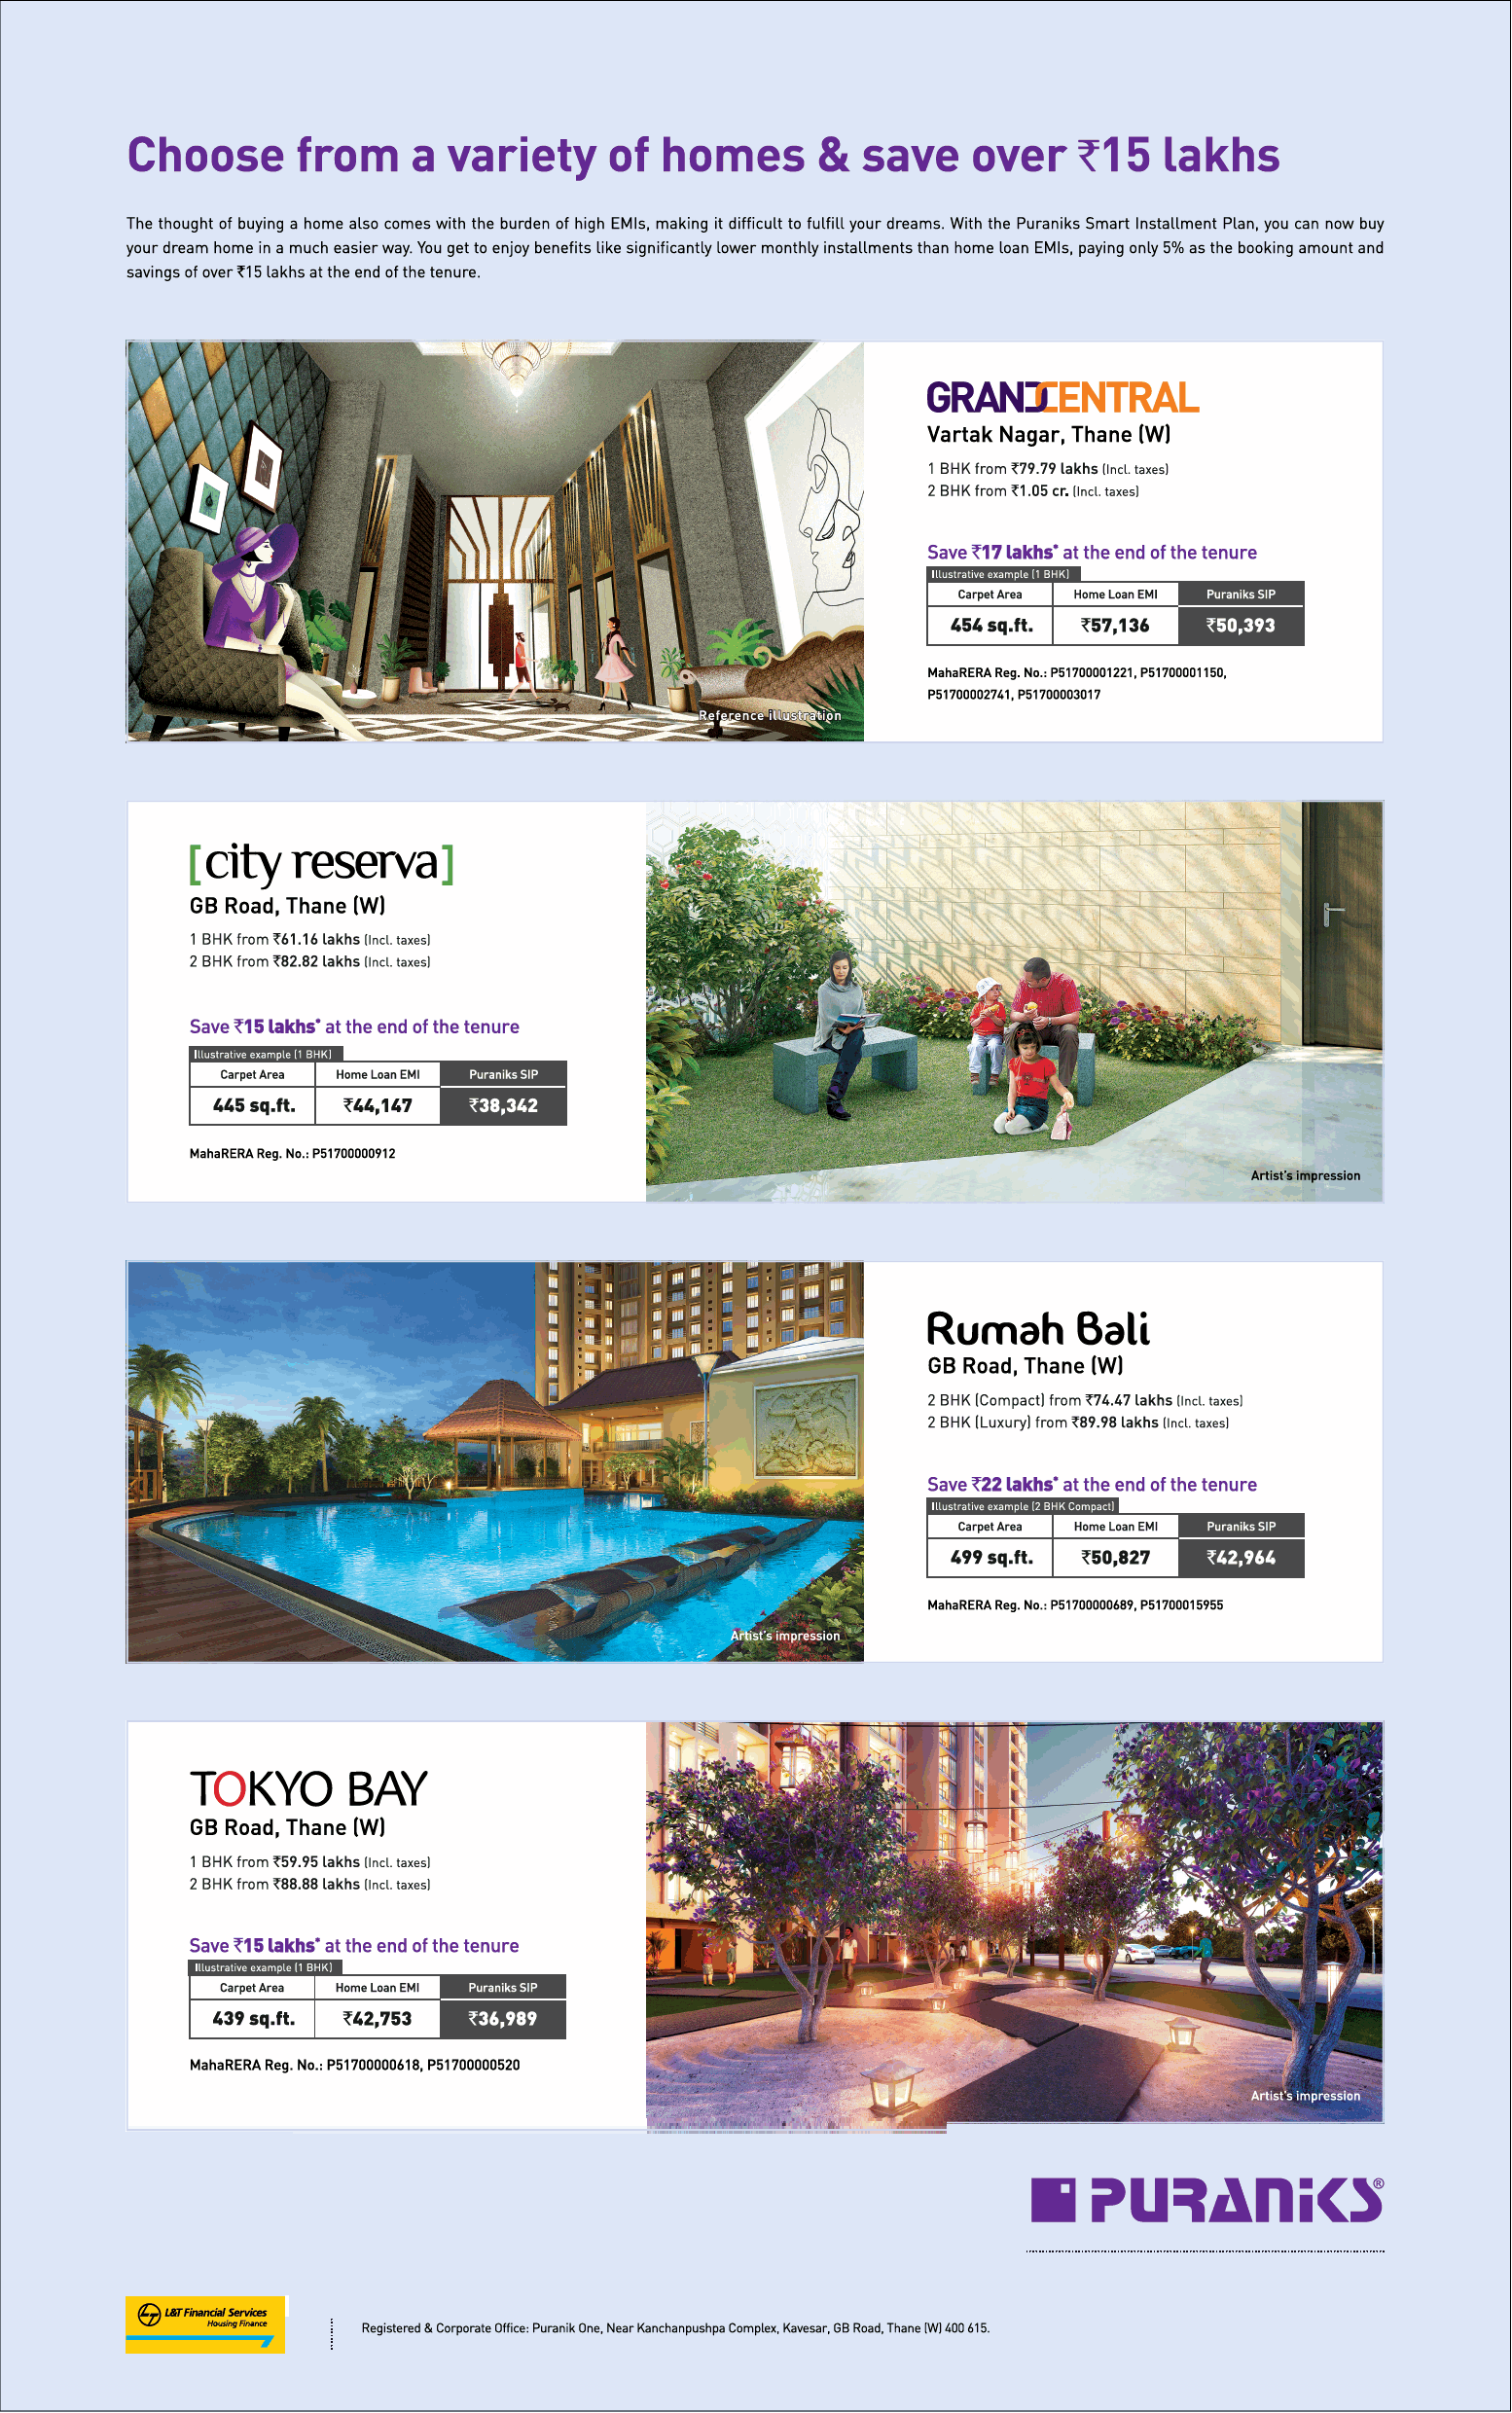 Choose from a variety of homes and save over Rs 15 lakh at Puraniks Projects, Mumbai